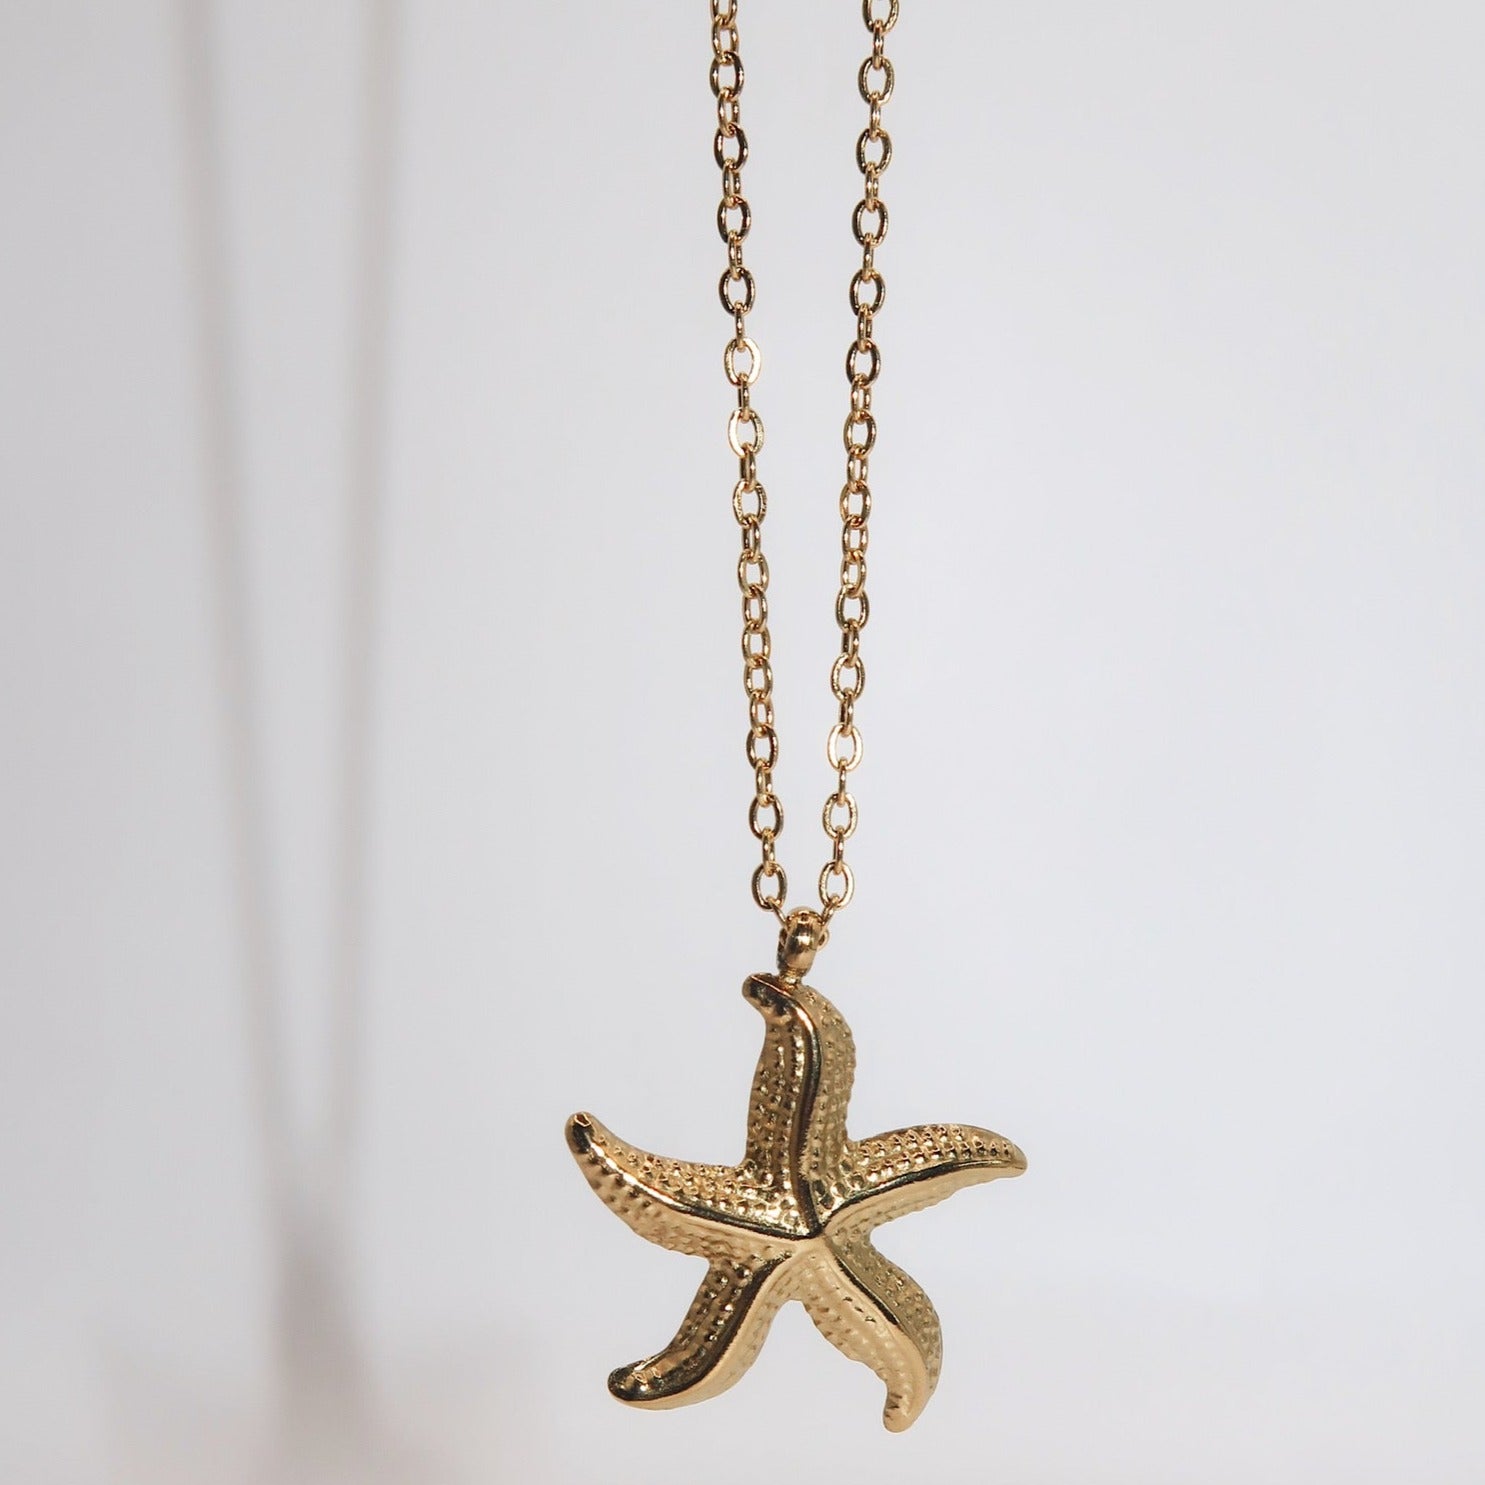 ADDISON - 18K PVD Gold Plated Dainty Starfish Pendant Necklace - Mixed Metals